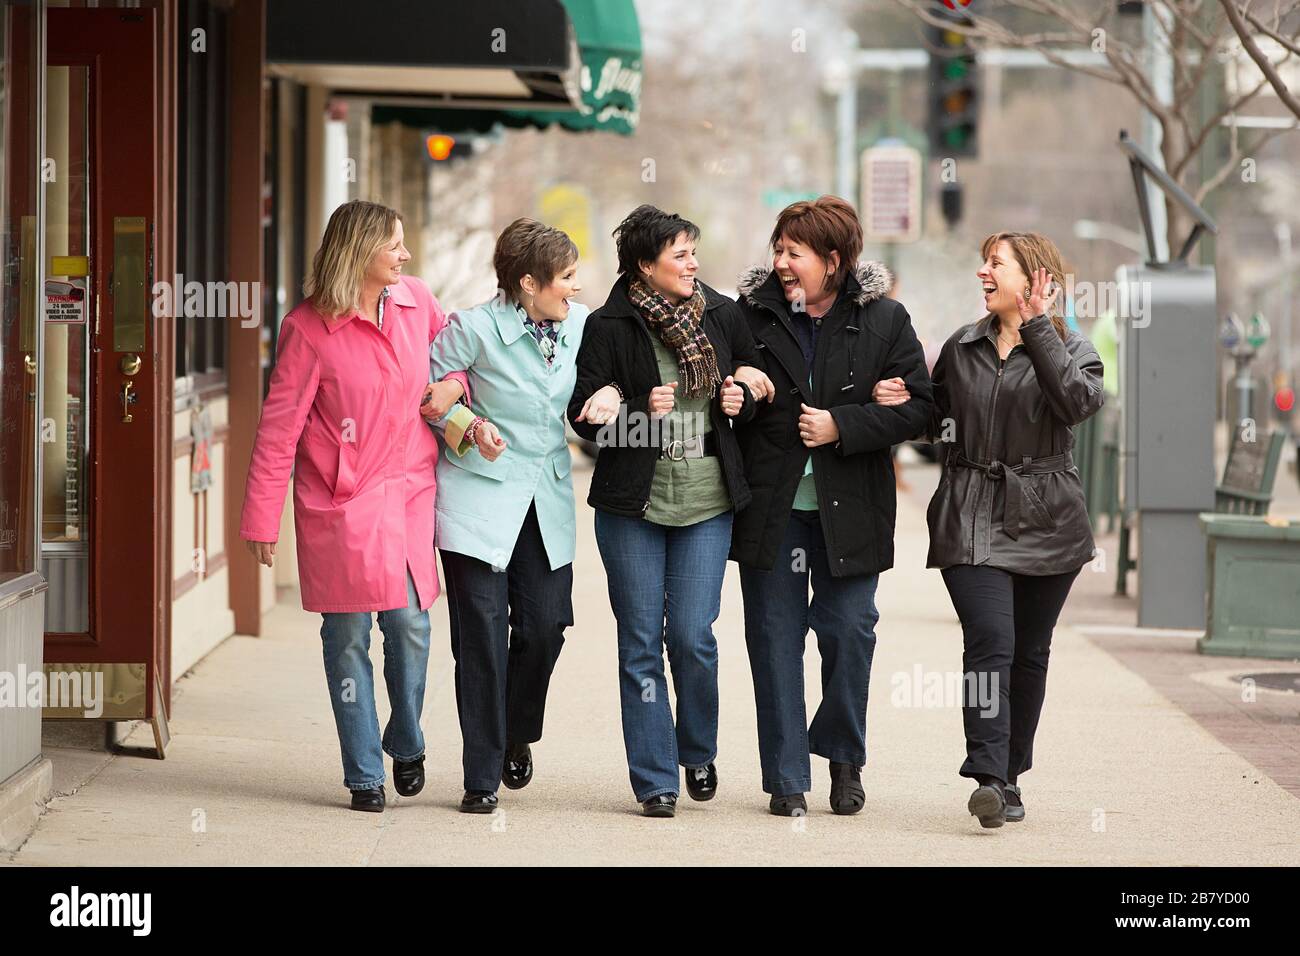 Middle aged women walking and laughing wtih linked arms Stock Photo